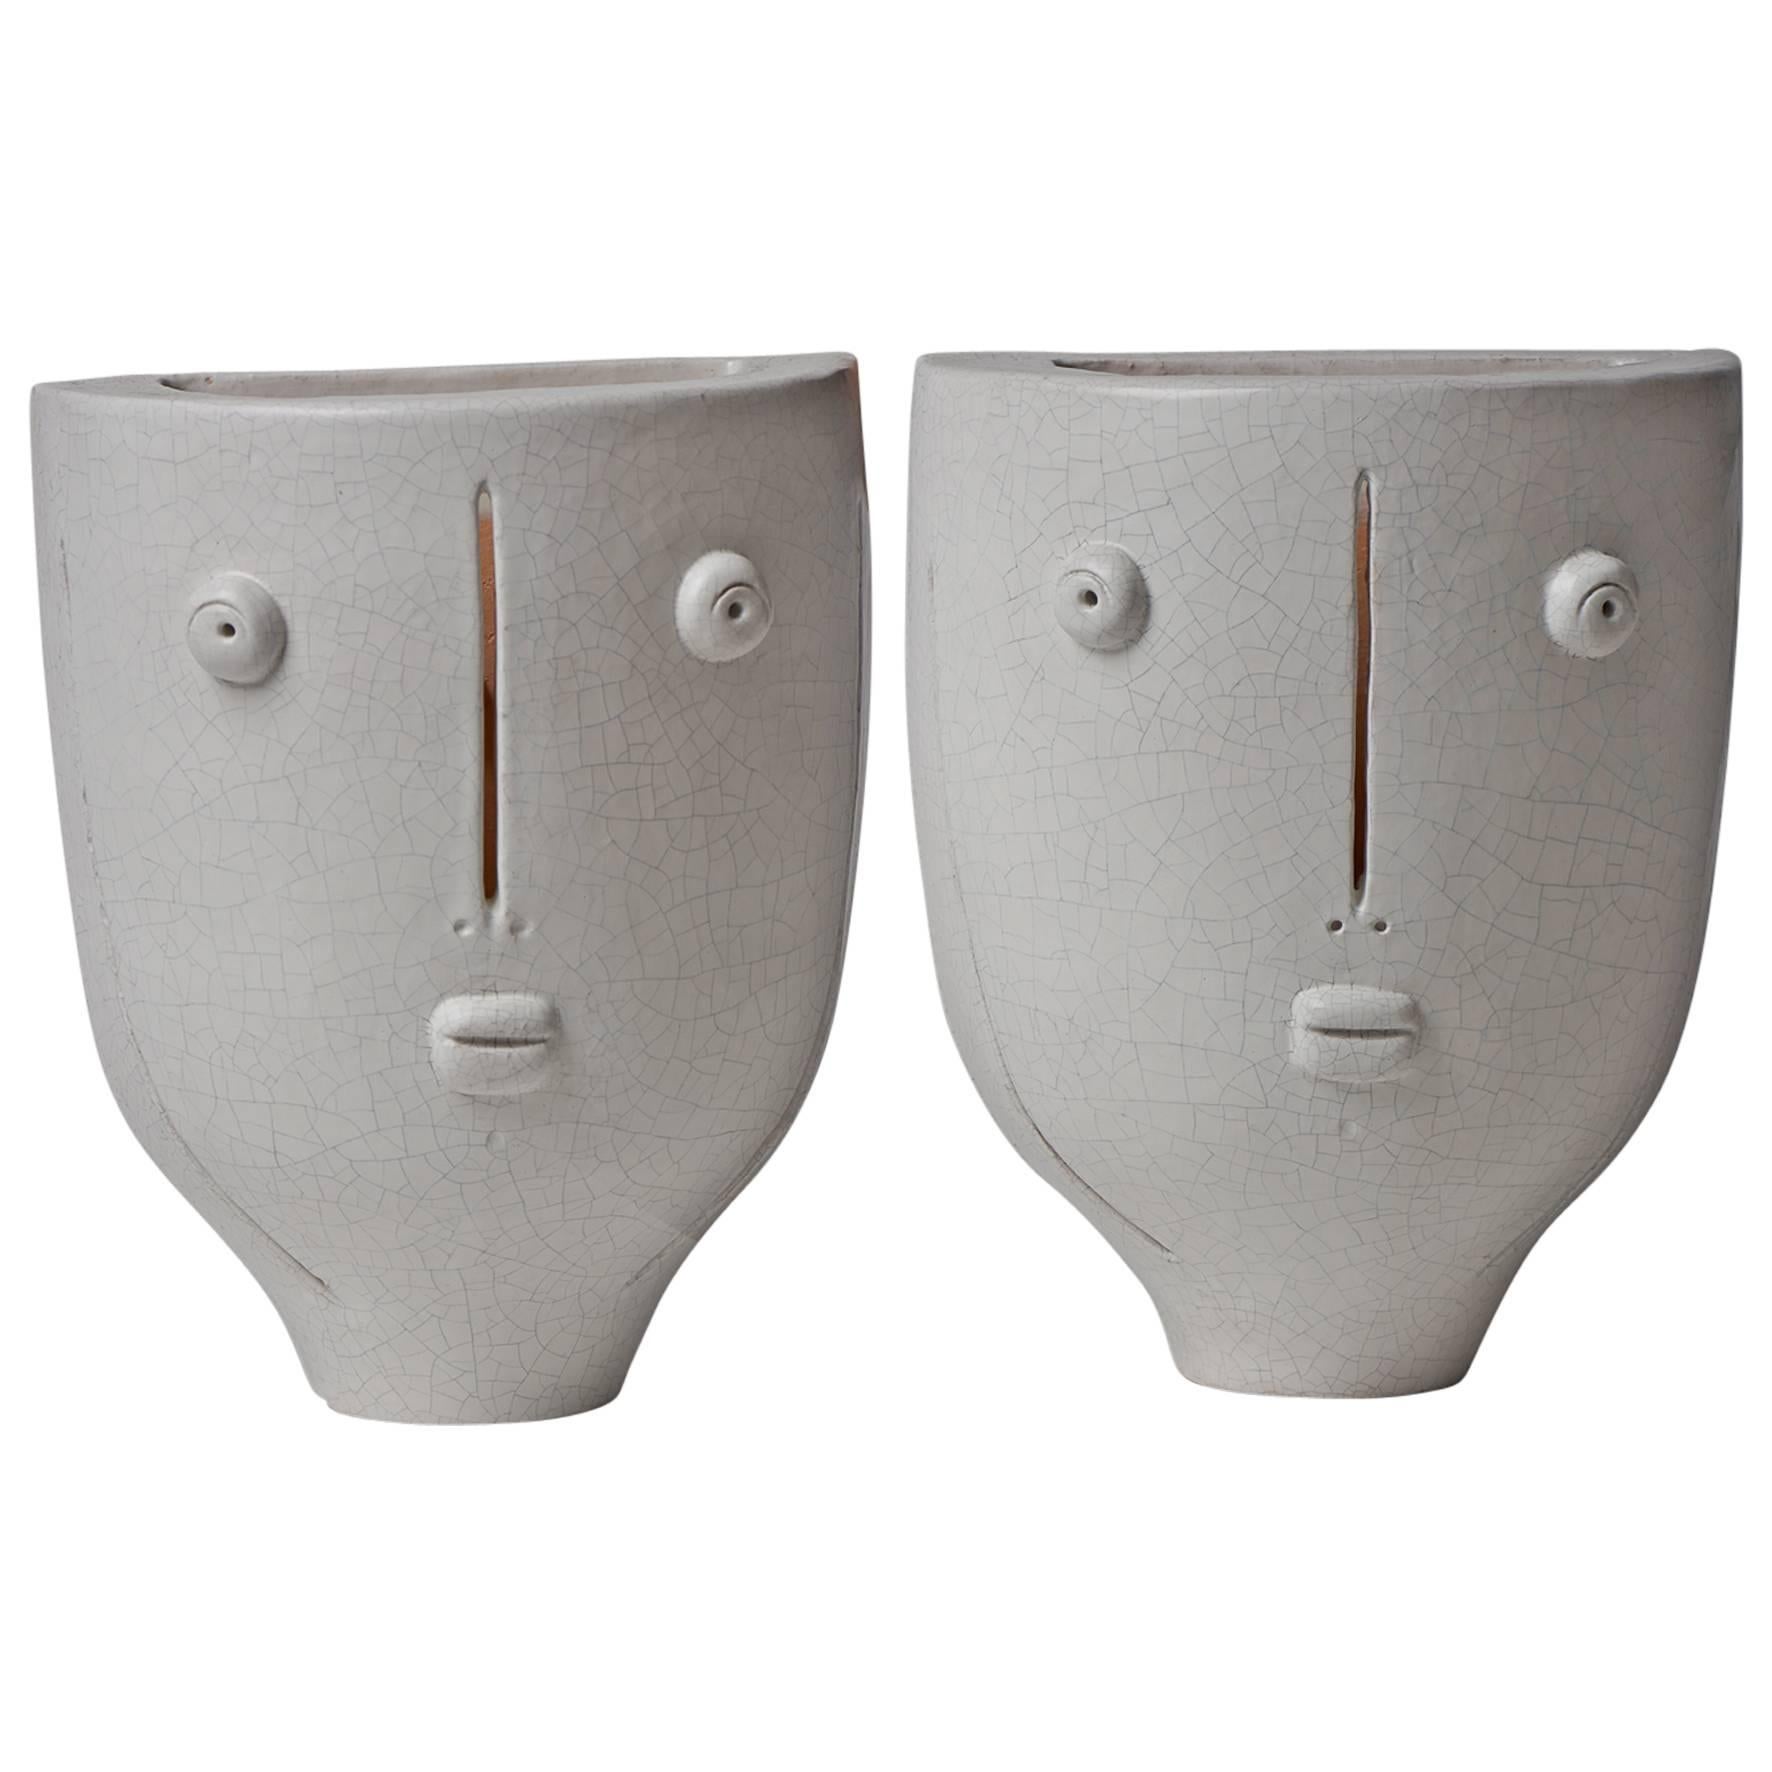 Pair of Ceramic Wall Lamps by DaLo